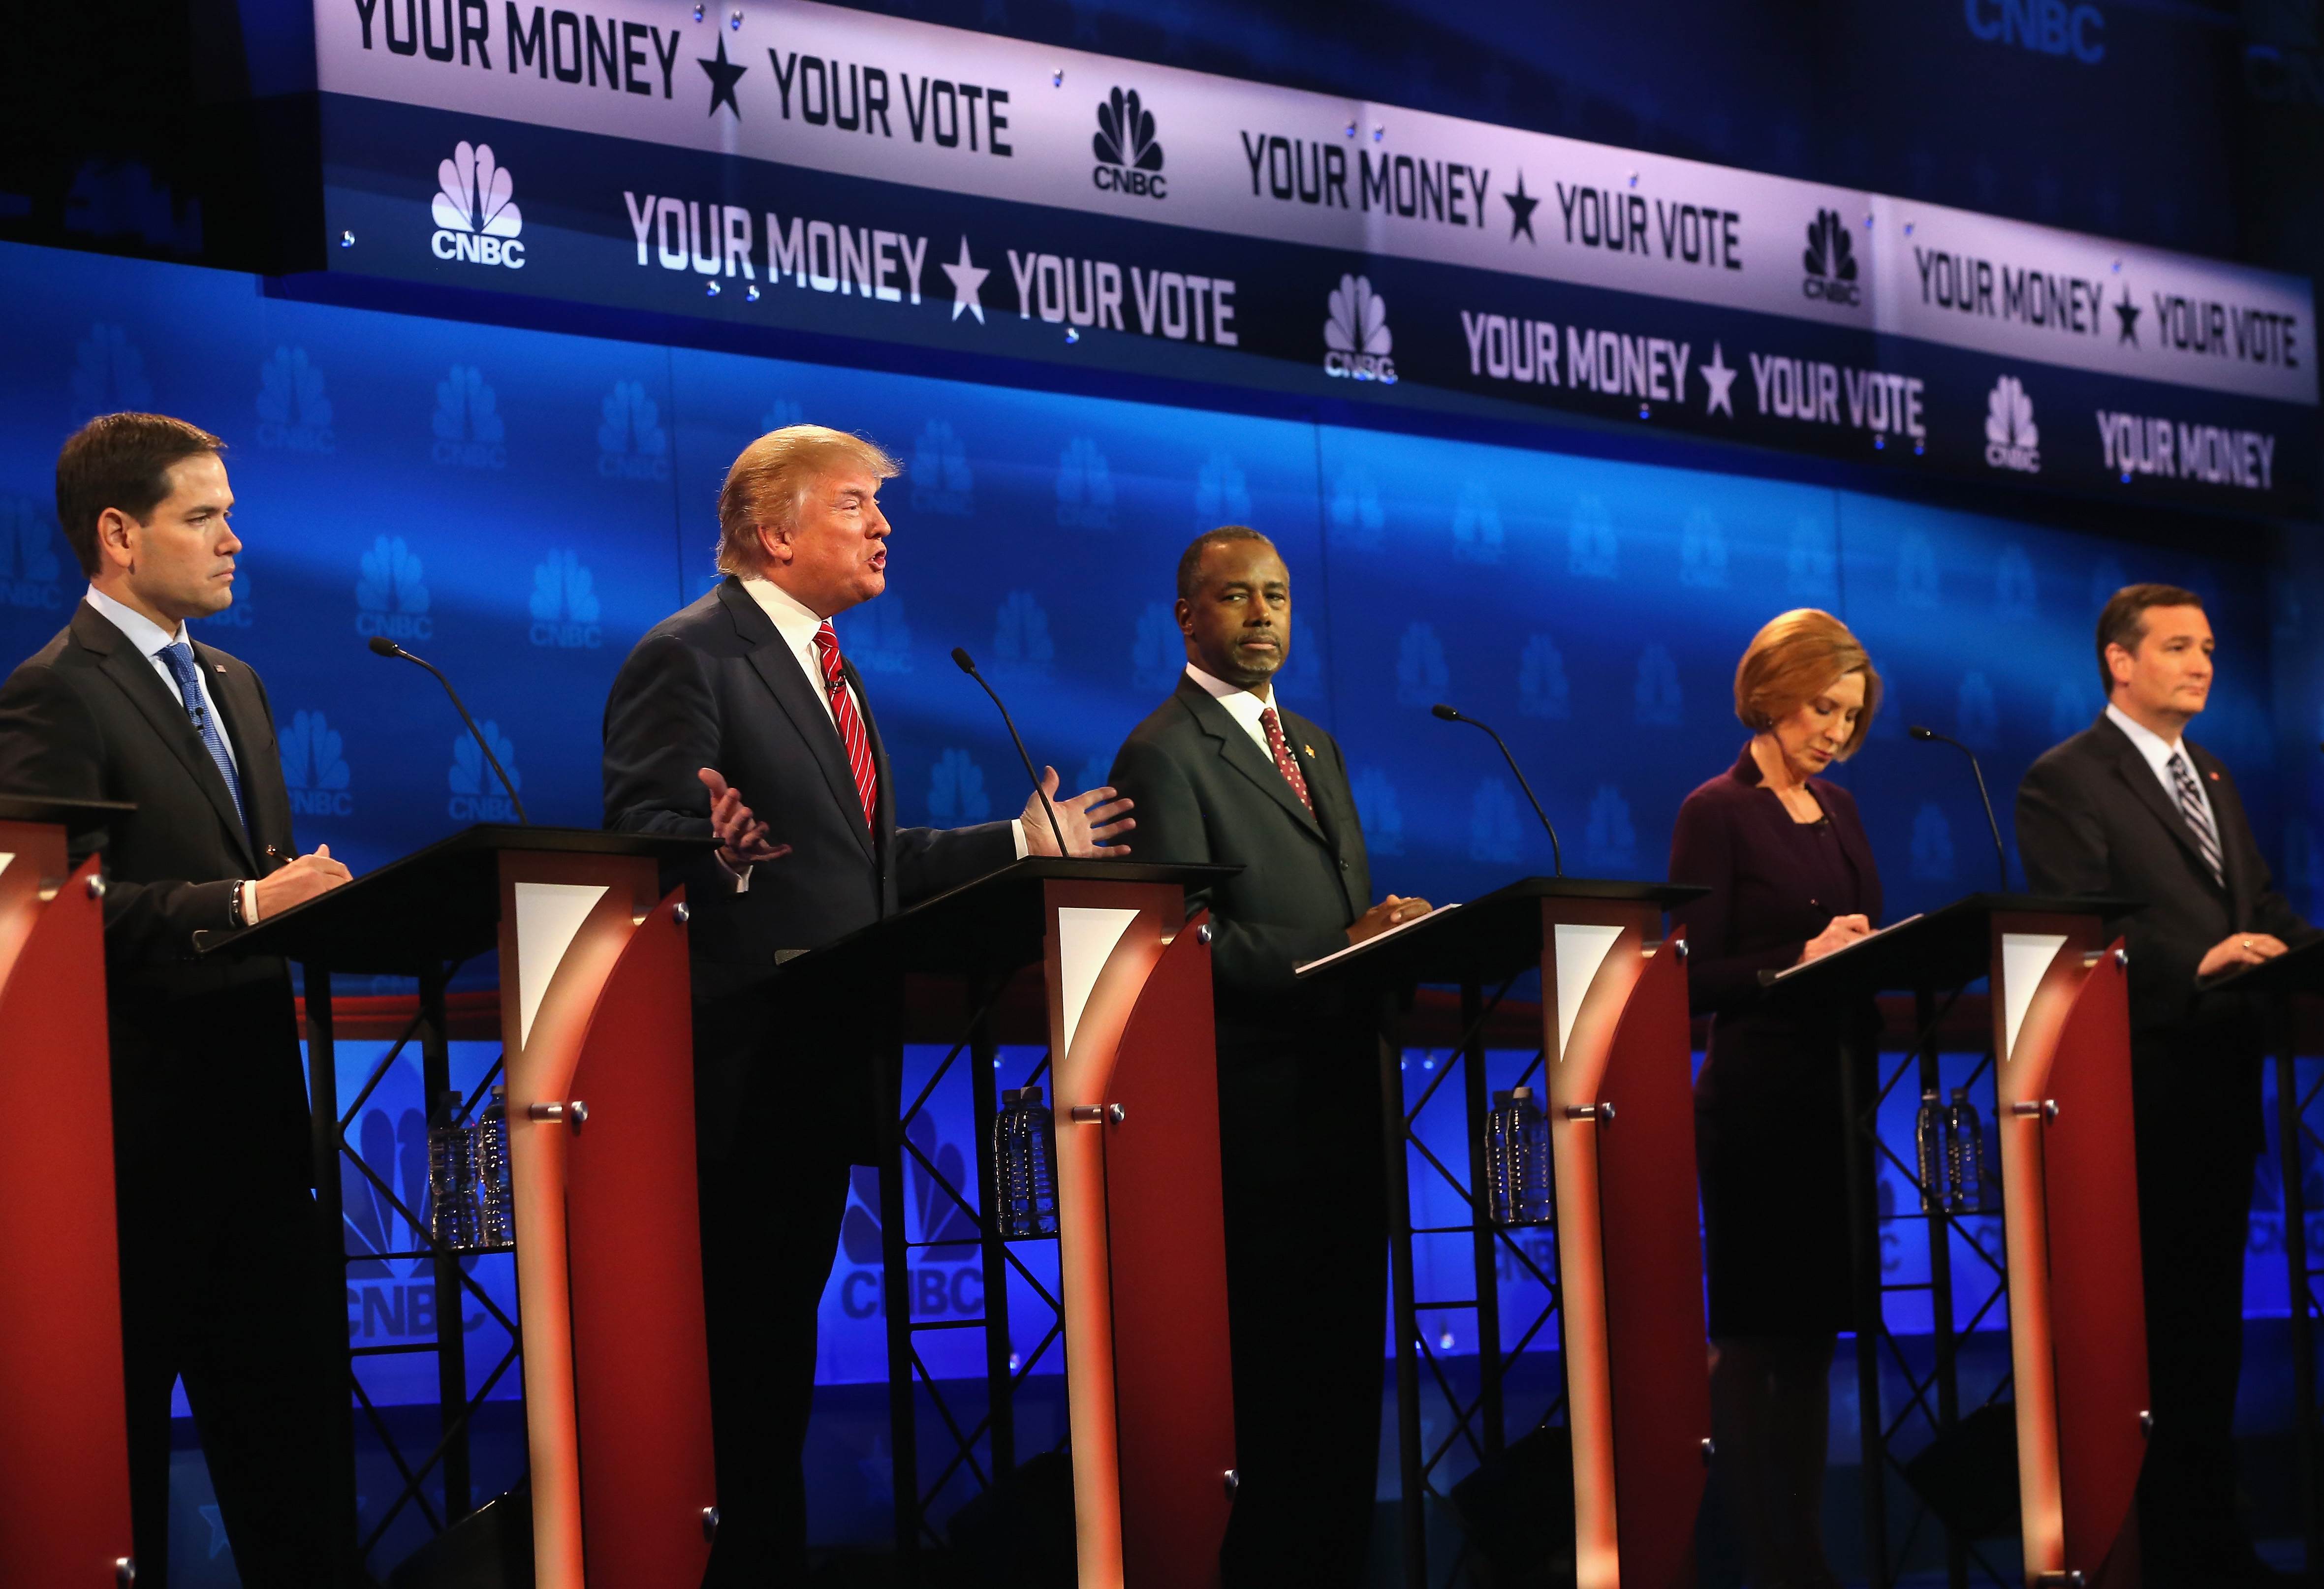 BOULDER, CO - OCTOBER 28: Presidential candidates Donald Trump (2nd L) speaks while Sen. Marco Rubio (L-R) (R-FL), Ben Carson, Carly Fiorina, Sen. Ted Cruz (R-TX) look on during the CNBC Republican Presidential Debate at University of Colorados Coors Events Center October 28, 2015 in Boulder, Colorado. Fourteen Republican presidential candidates are participating in the third set of Republican presidential debates. Justin Sullivan/Getty Images/AFP == FOR NEWSPAPERS, INTERNET, TELCOS & TELEVISION USE ONLY ==